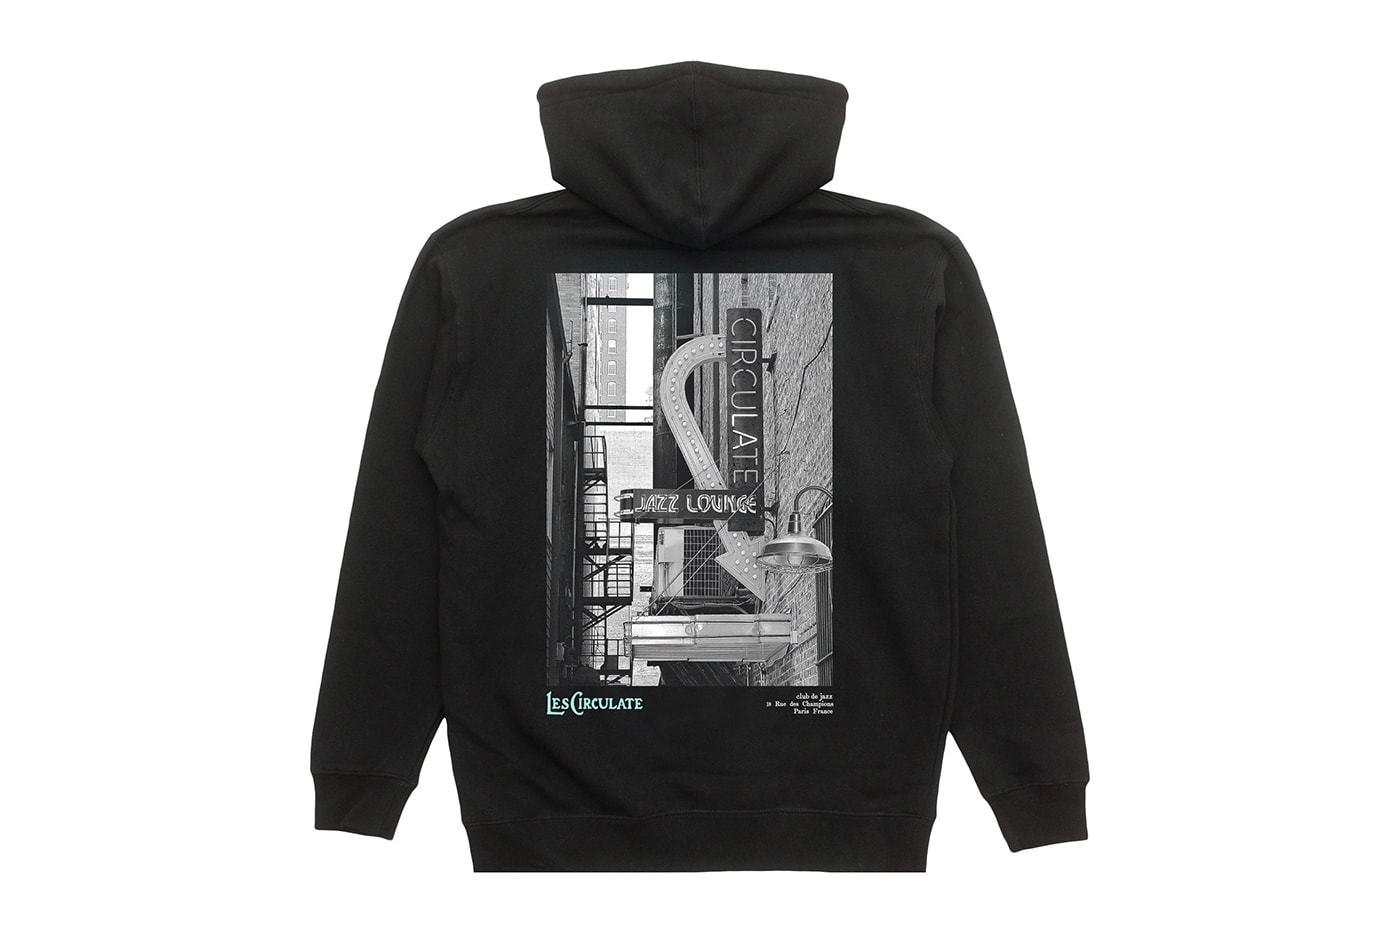 Circulate Seeing Sounds Capsule Release Info Collection Jacket Hoodie T shirt